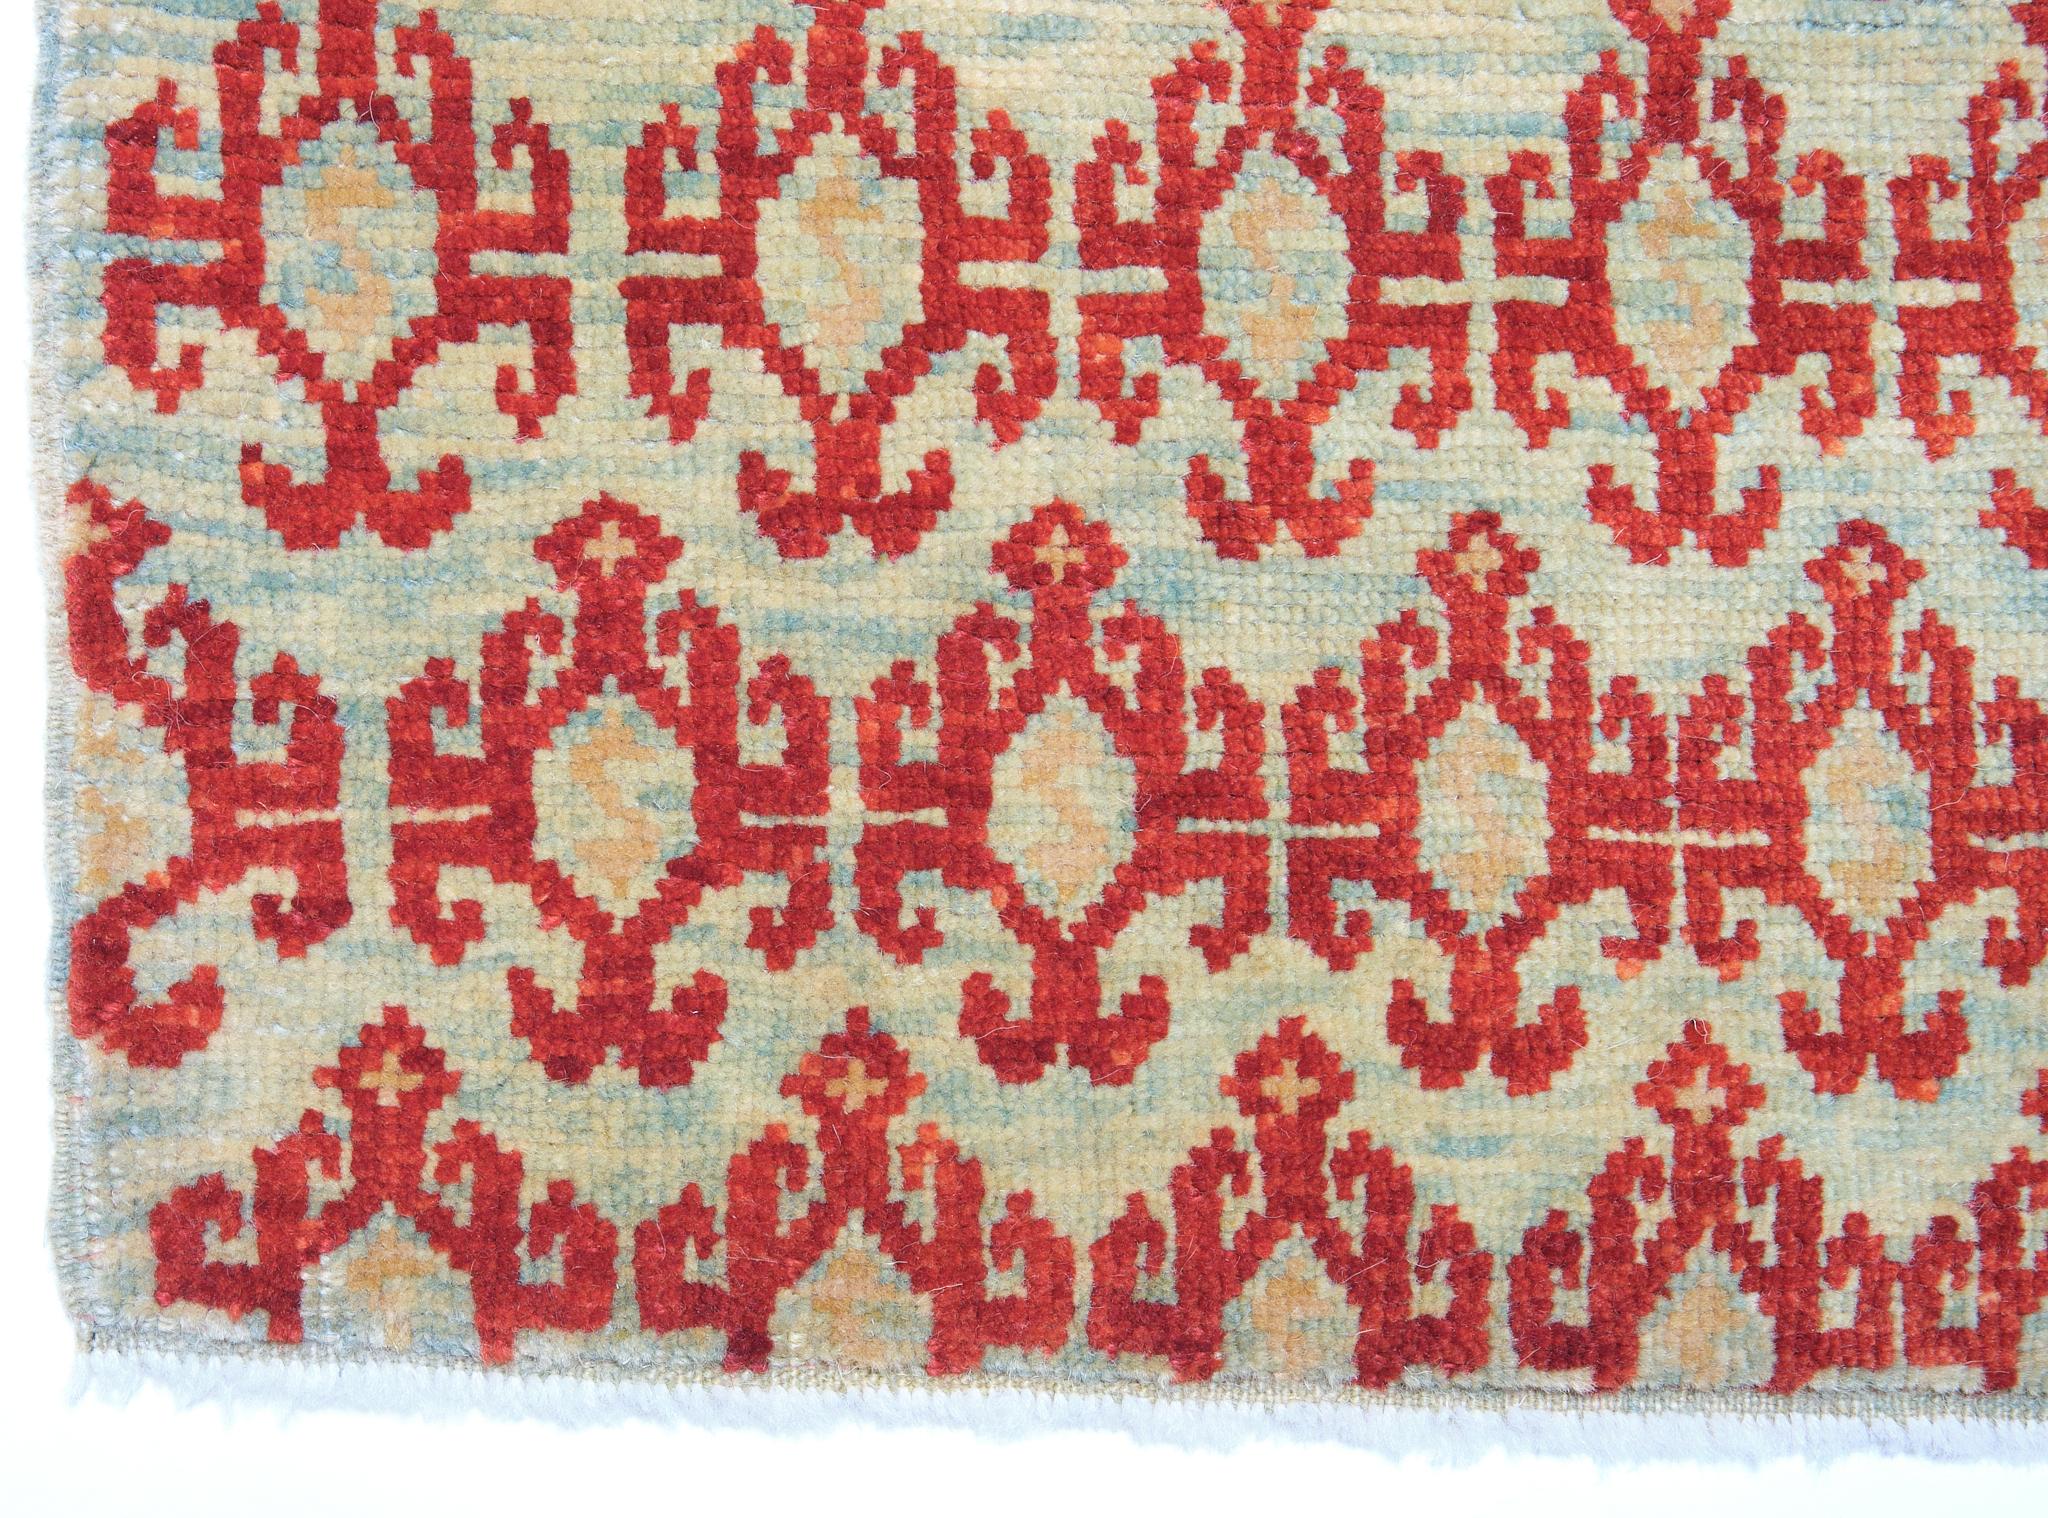 The source of carpet comes from the book Orient Stars Collection, Anatolian Tribal Rugs 1050-1750, Michael Franses, Hali Publications Ltd, 2021 fig.27. This 13th-century carpet is from probably the Konya region, central Anatolia, circa 1200-1300 (C